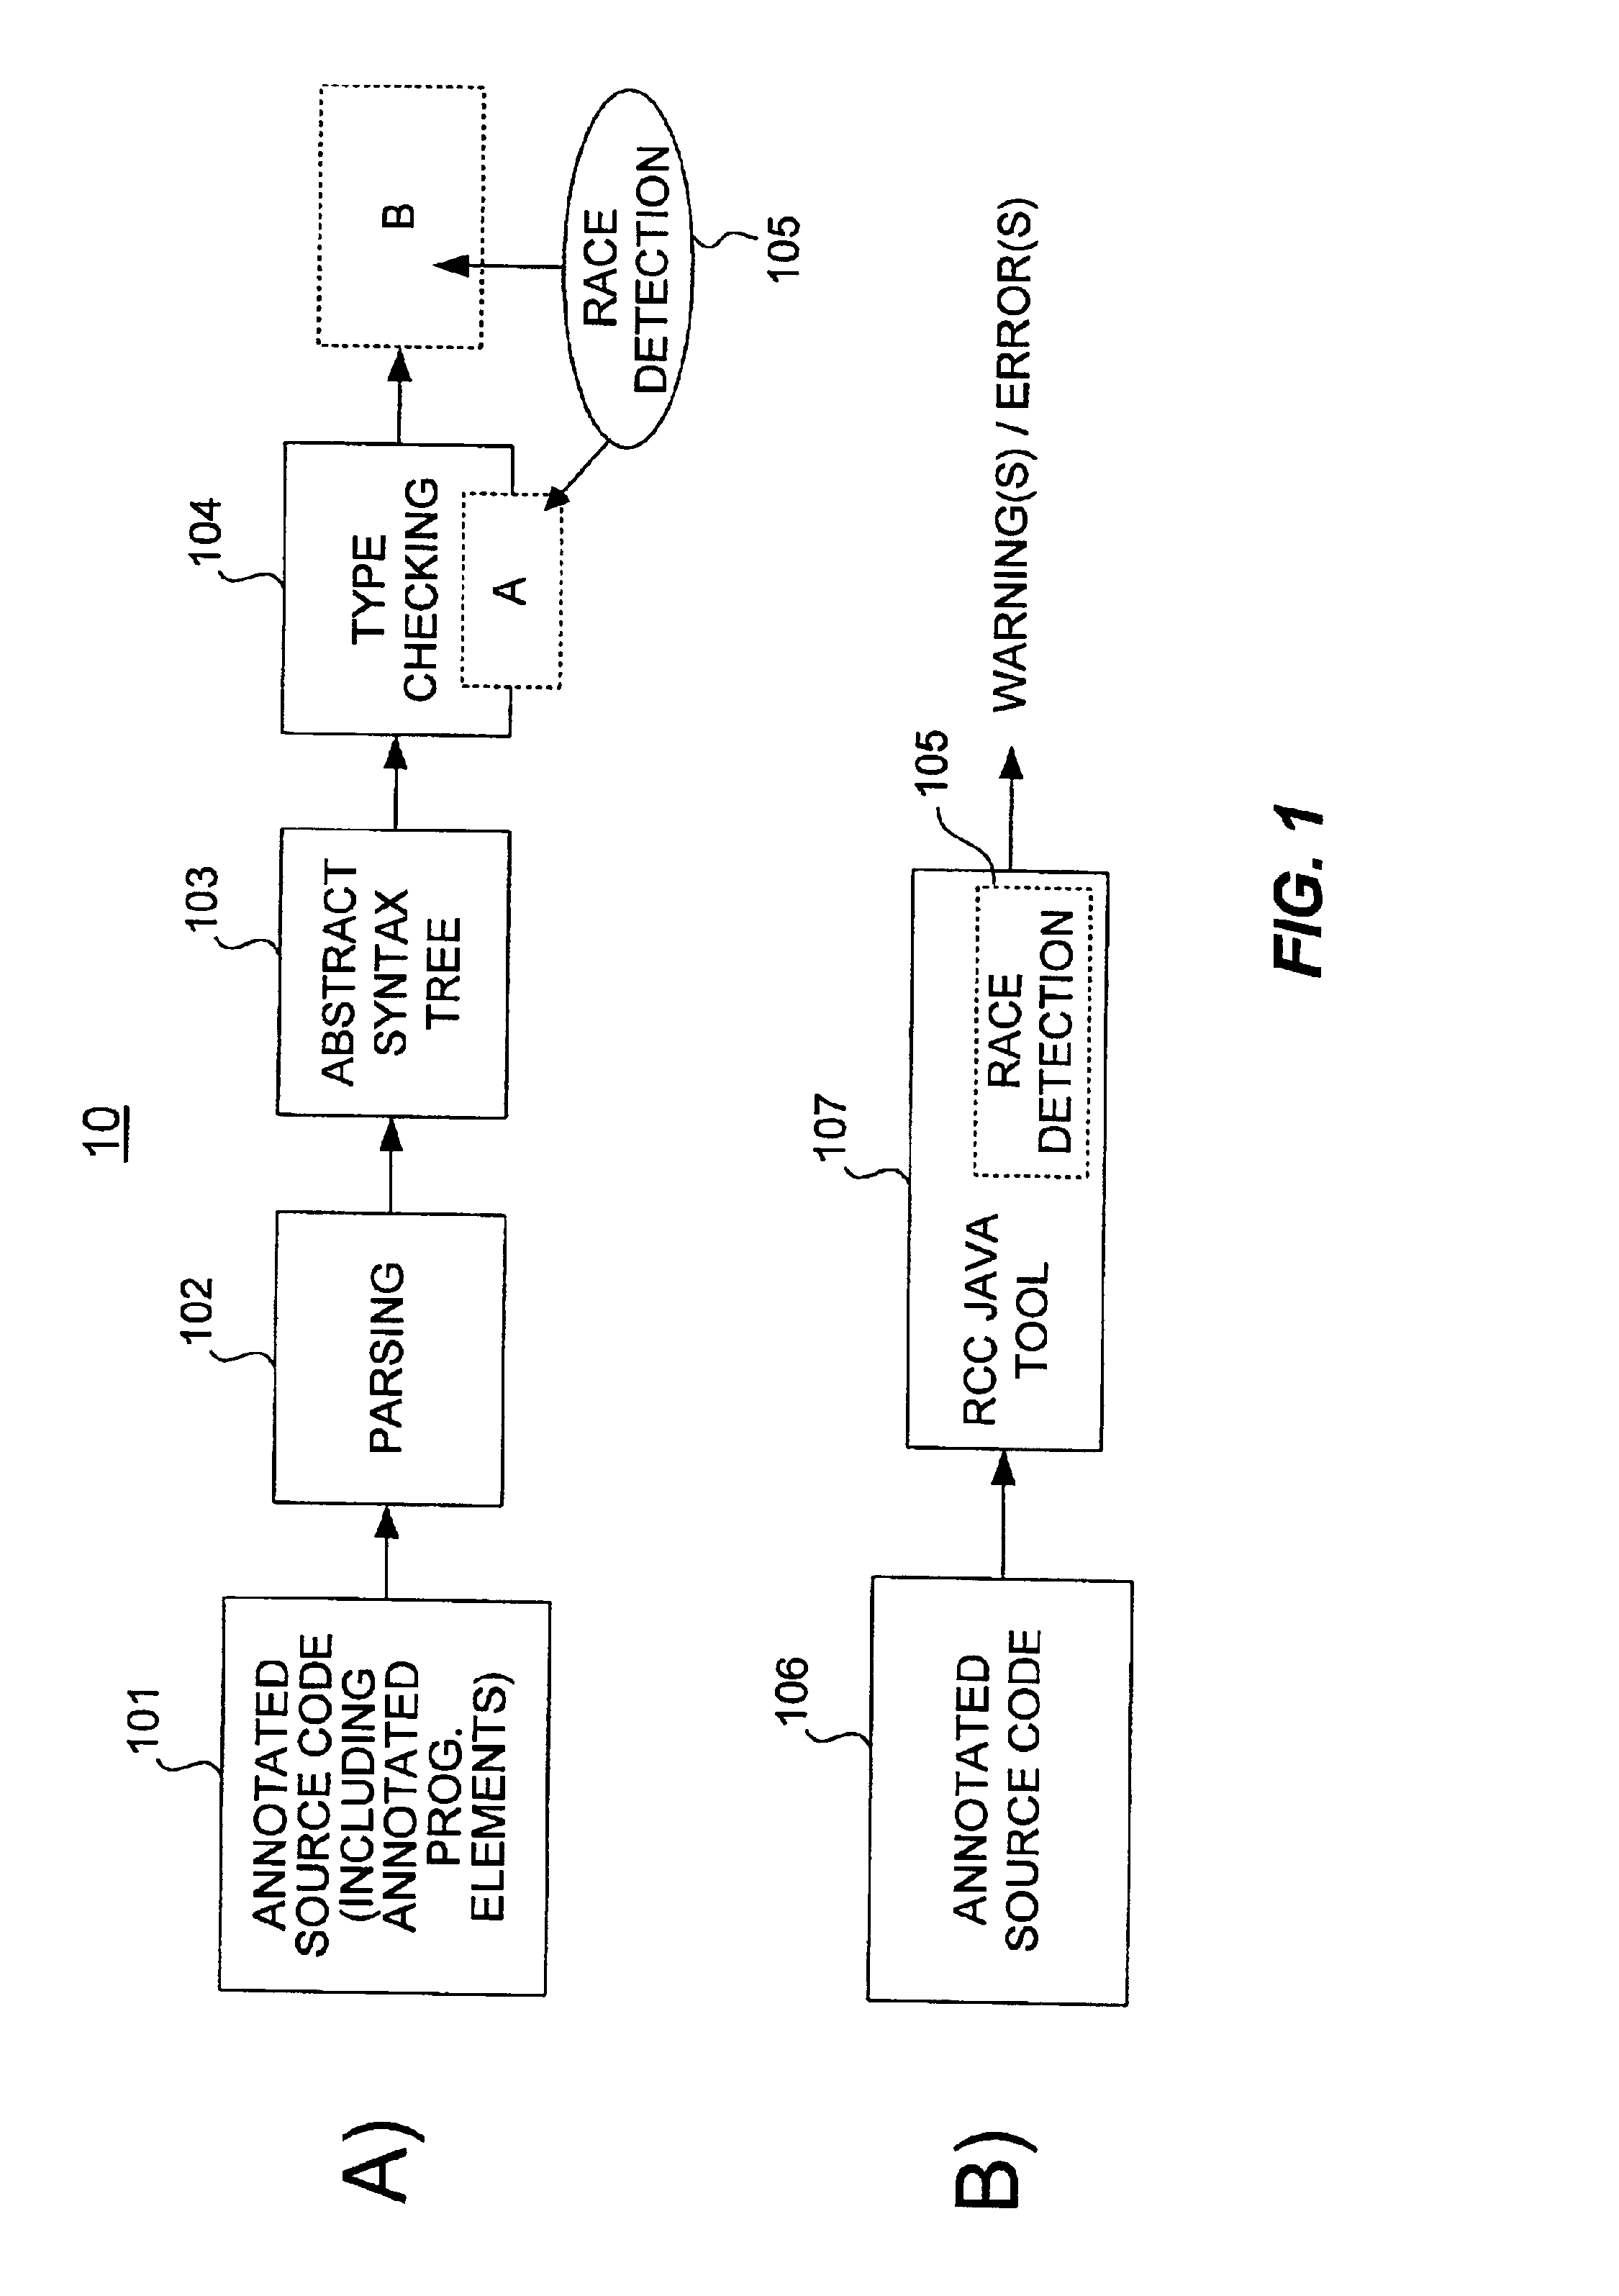 Method and apparatus for verifying data local to a single thread